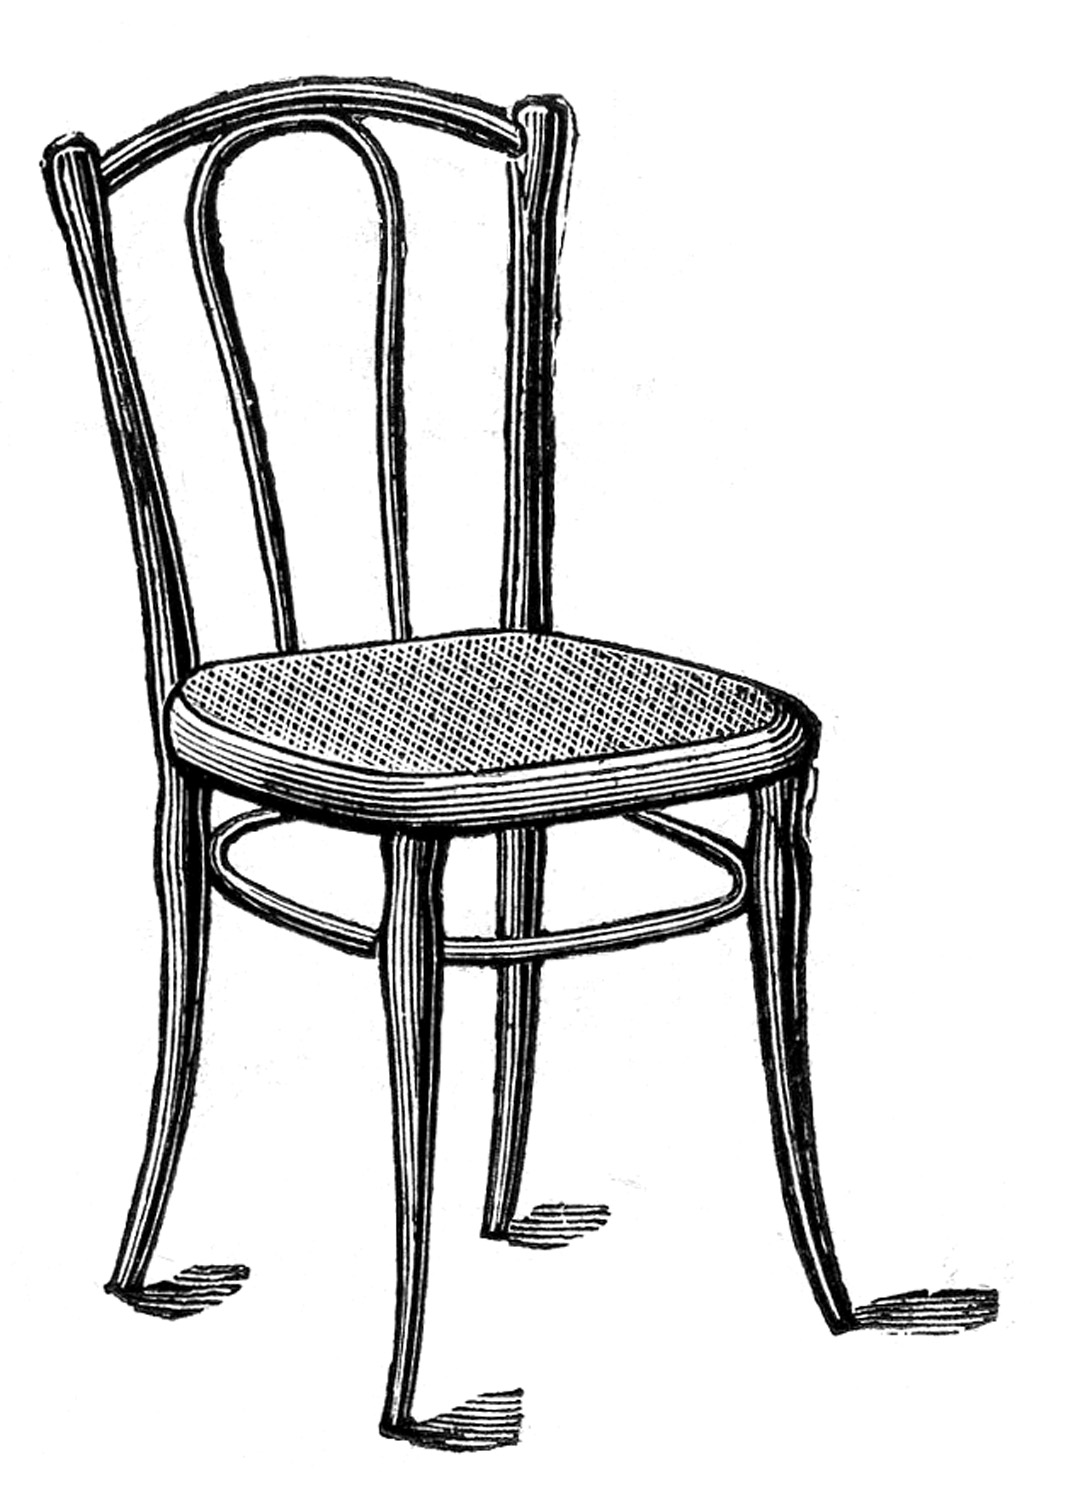 Antique Images - Caned Bentwood Chairs - The Graphics Fairy